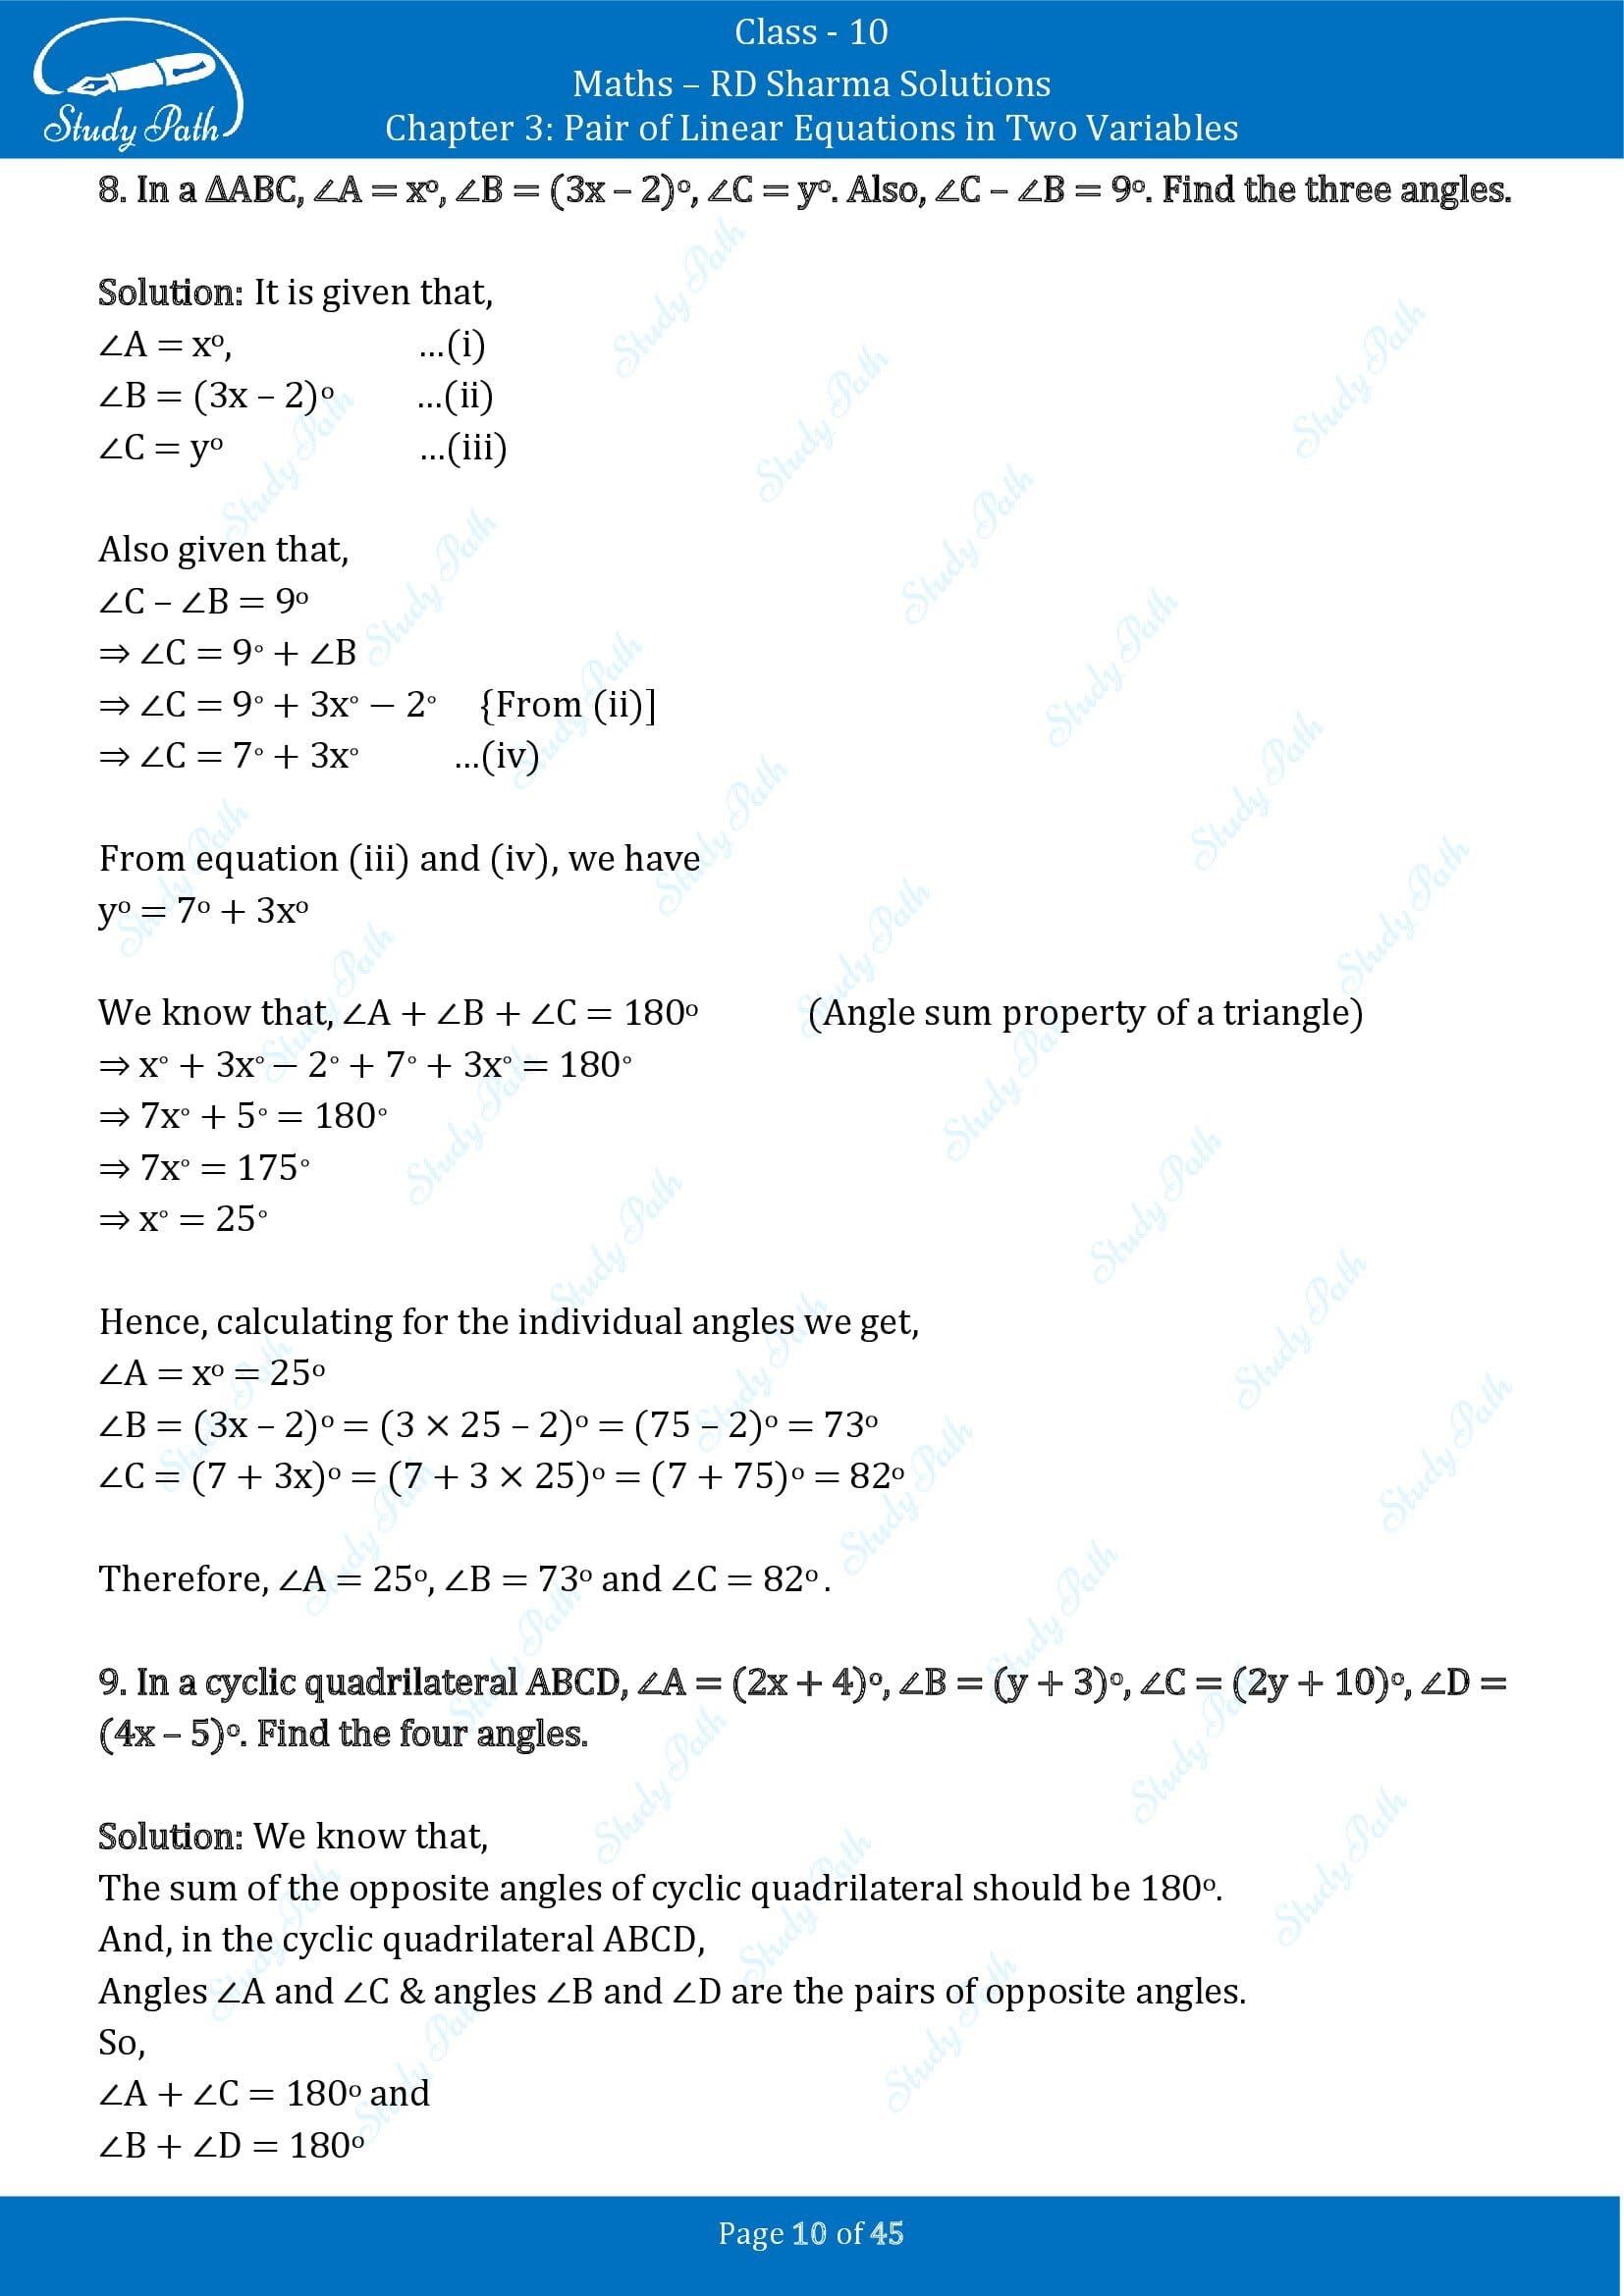 RD Sharma Solutions Class 10 Chapter 3 Pair of Linear Equations in Two Variables Exercise 3.11 00010